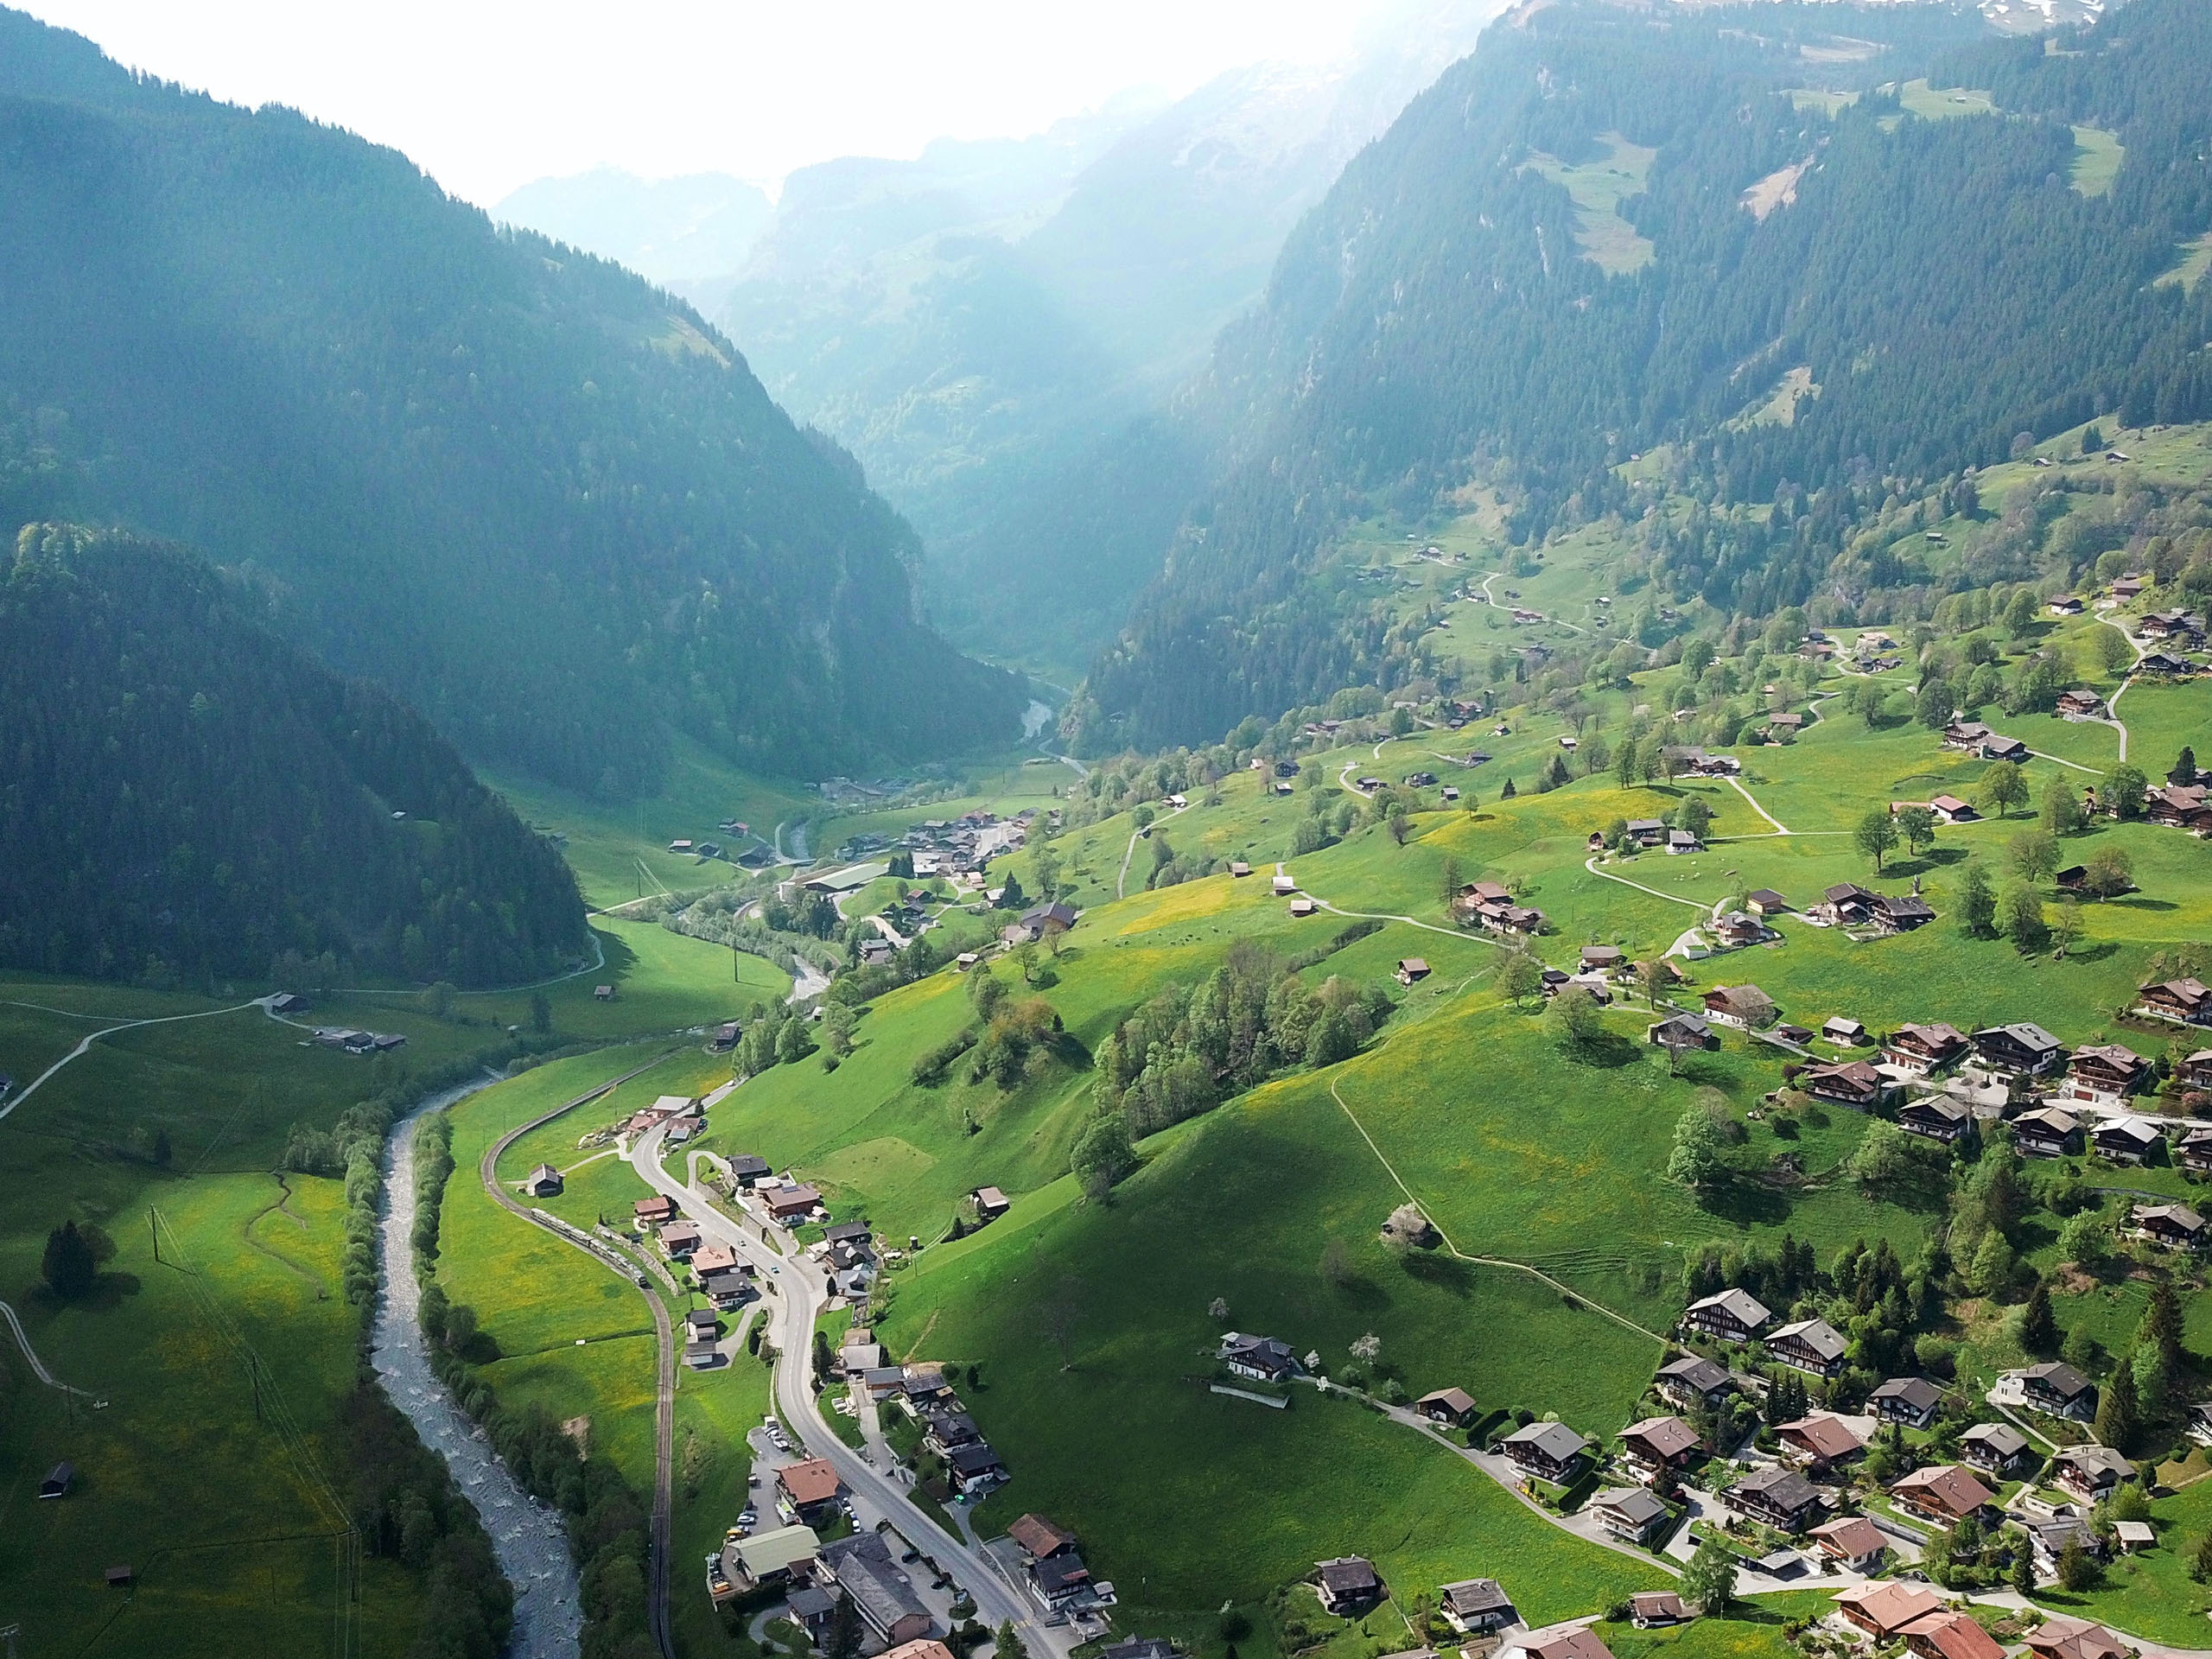 Grindelwald - a summer hotspot for hiking and outdoorsy adventures